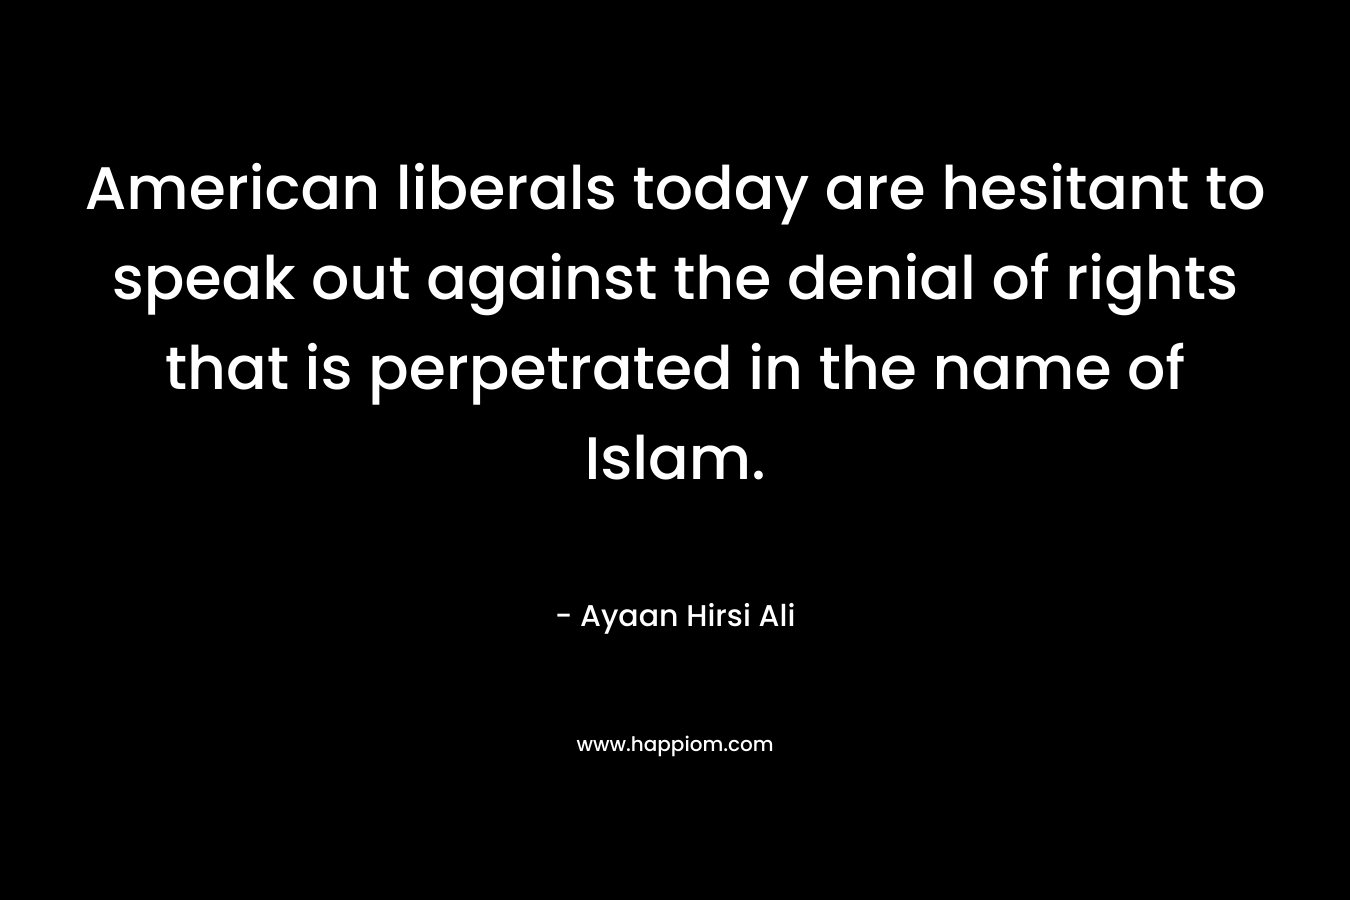 American liberals today are hesitant to speak out against the denial of rights that is perpetrated in the name of Islam. – Ayaan Hirsi Ali